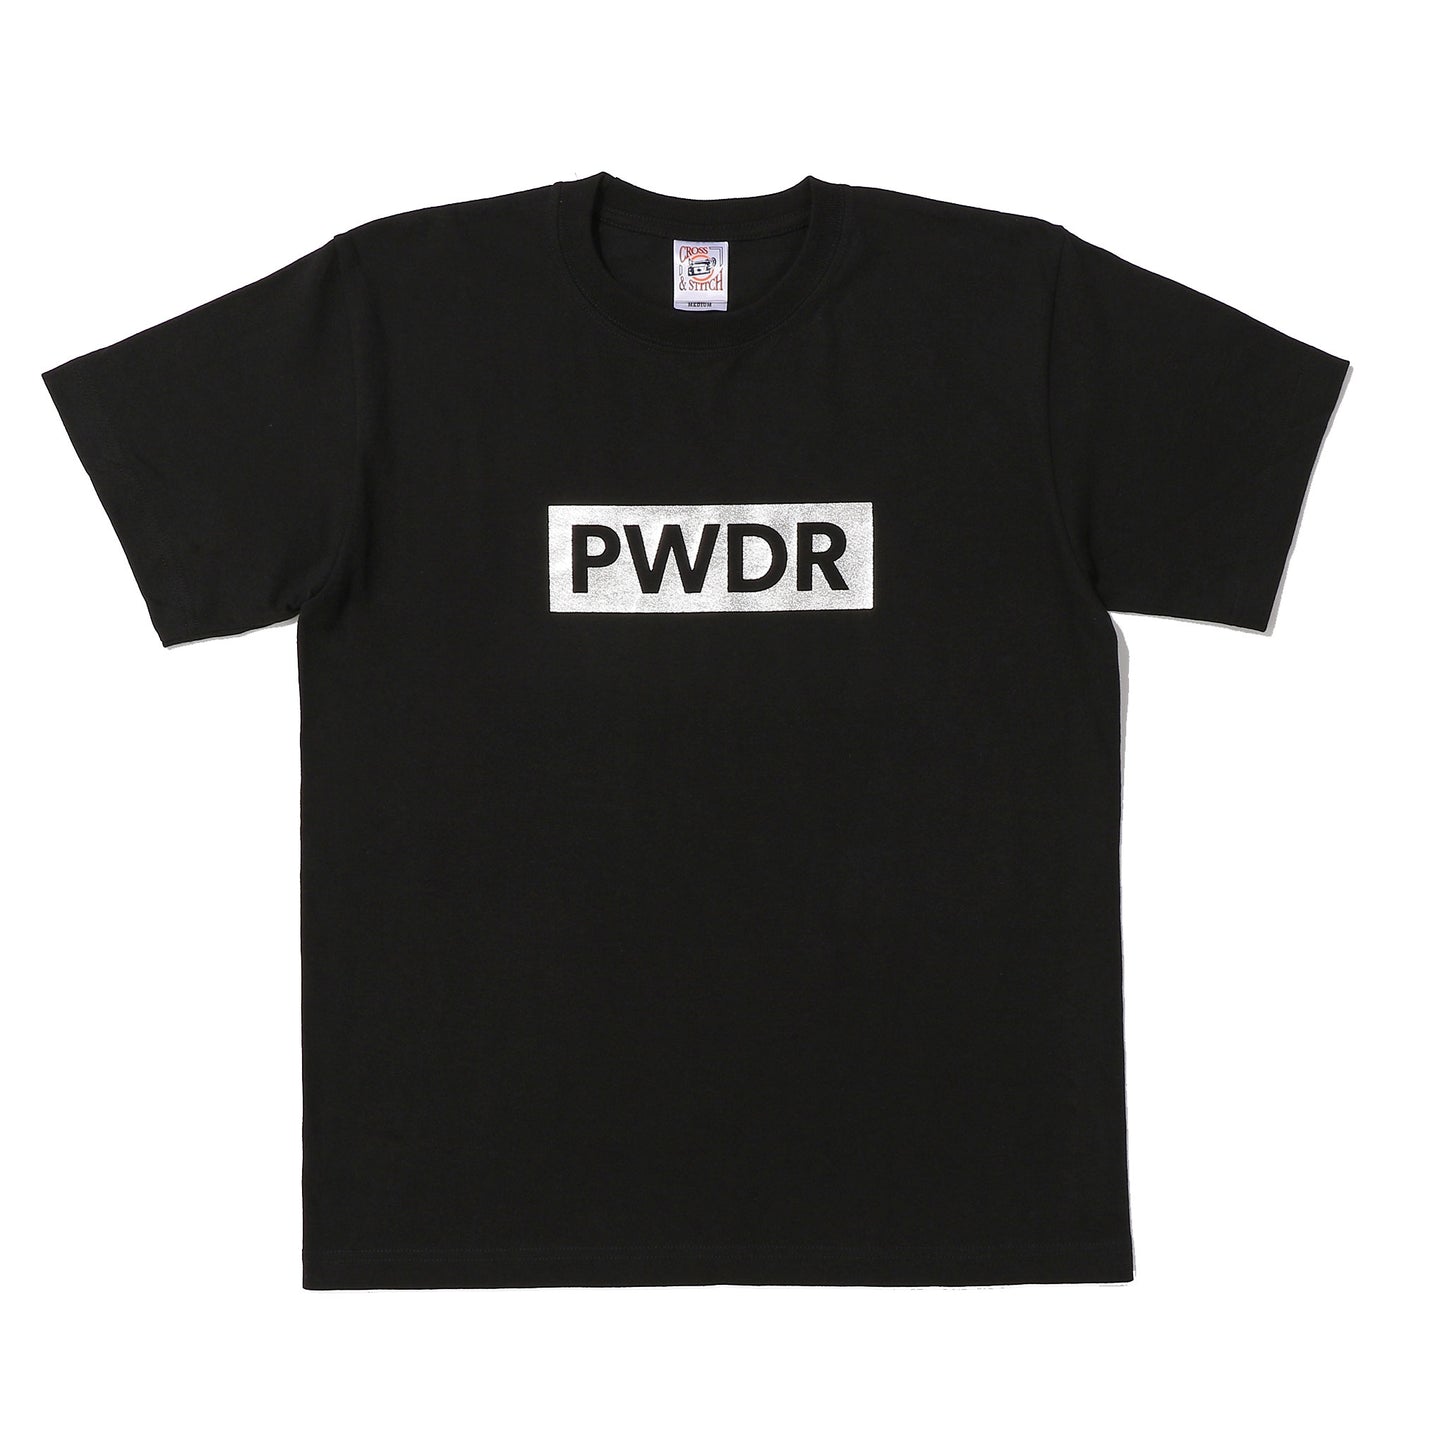 PWDR Tee